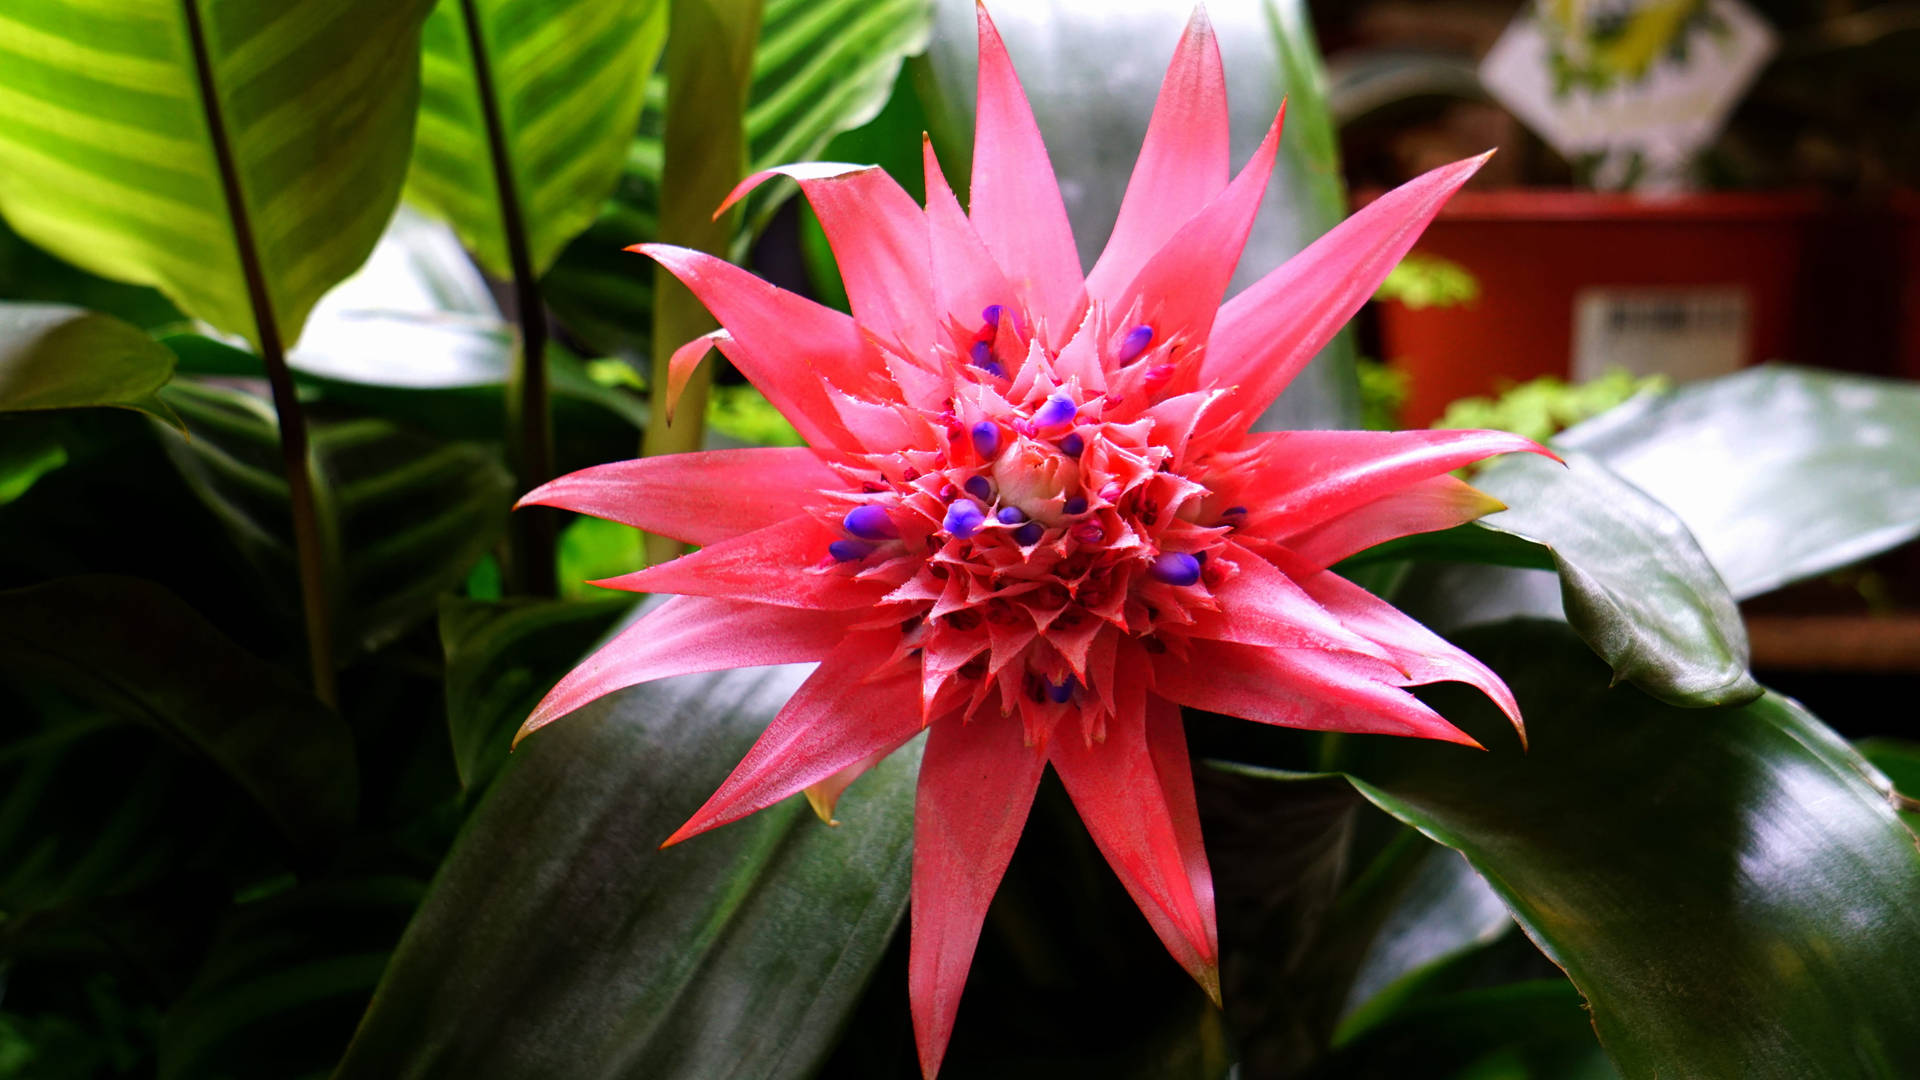 Bromeliad Flower And Green Leaves Background